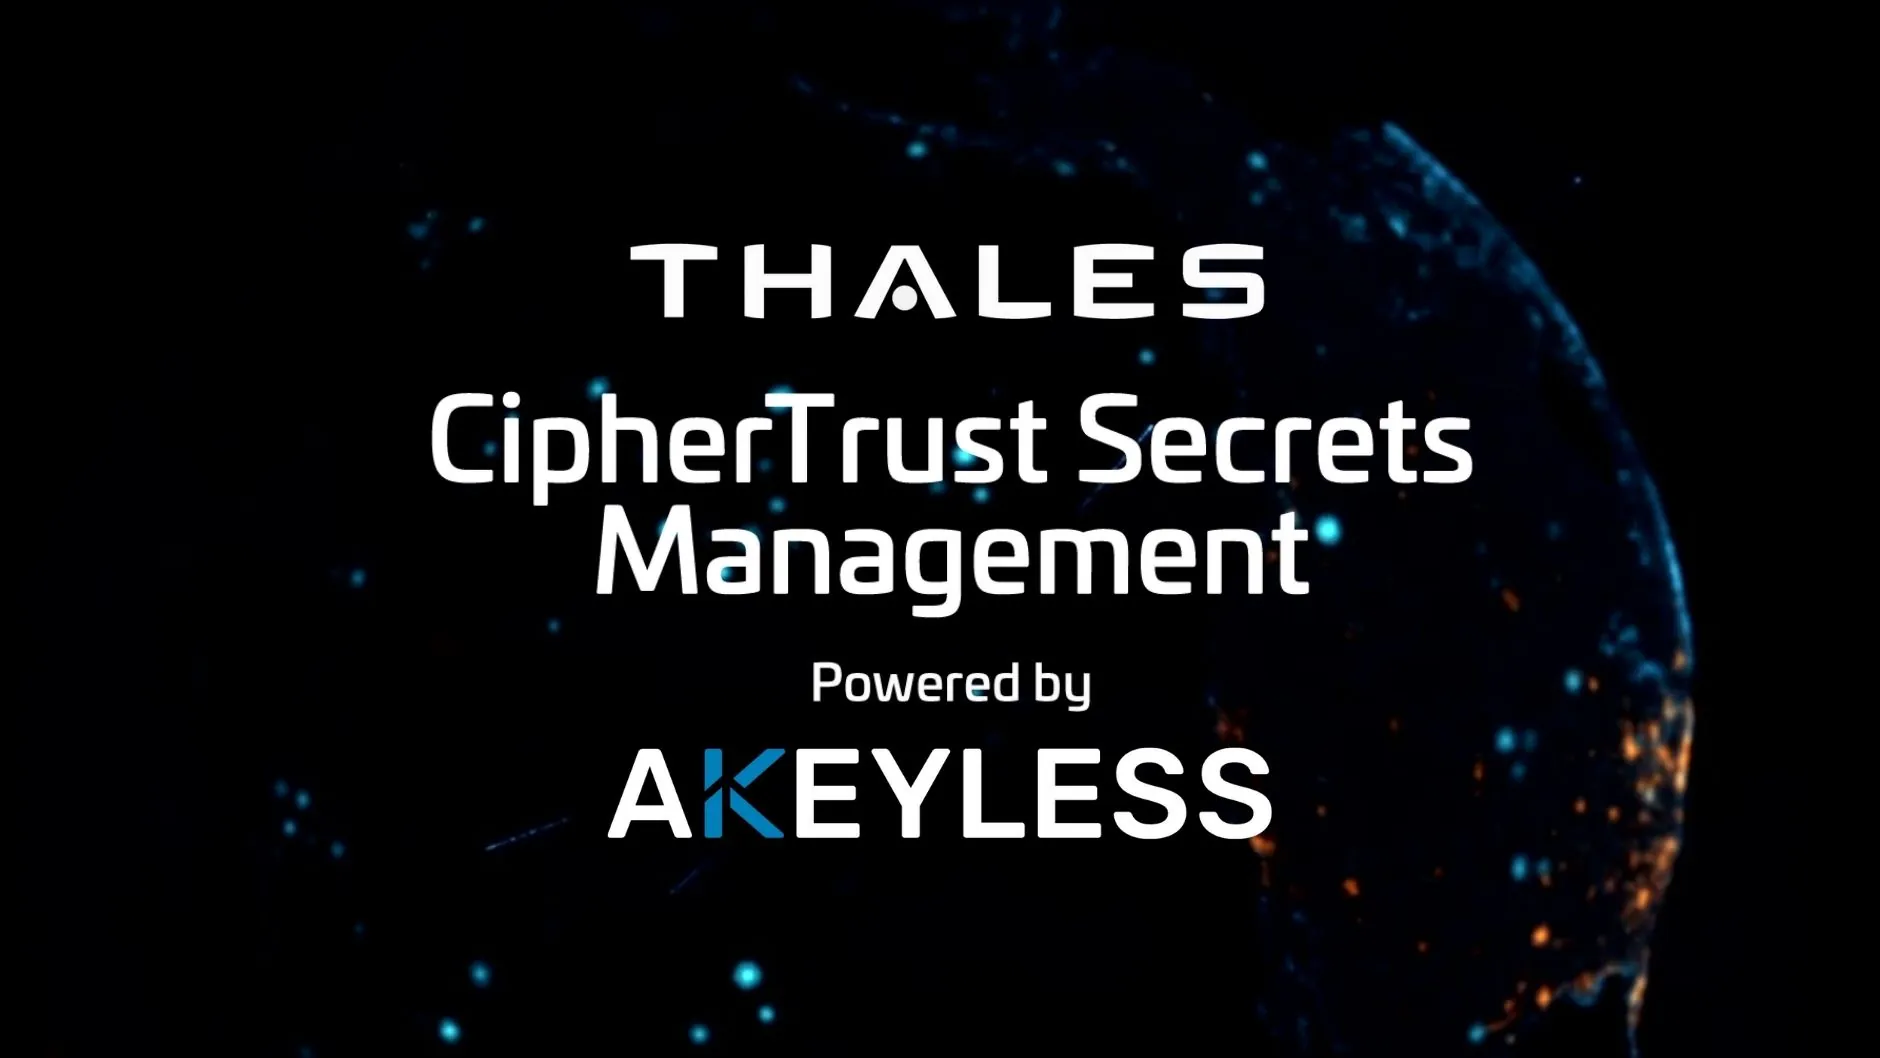 Thales and Akeyless Join Forces for a New Era of Secrets Management